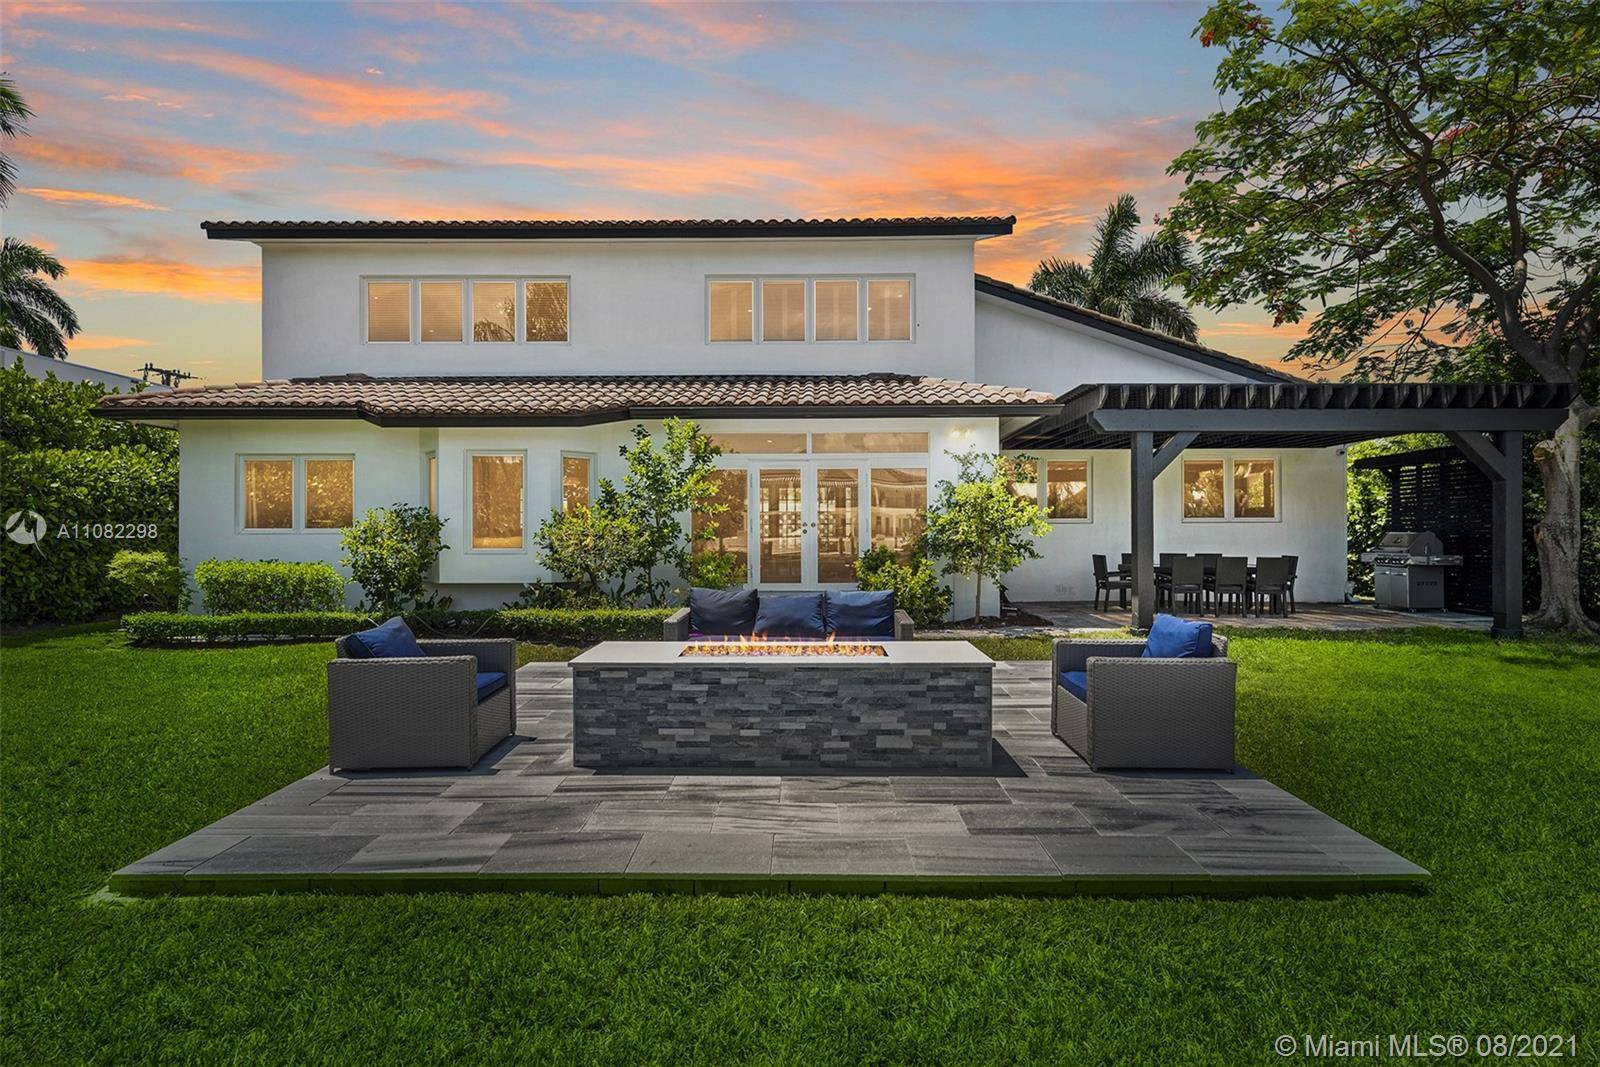 TWO STORY WATERFRONT VILLA WITH A GORGEOUS POOL, STUNNING FIREPIT AND PERGOLA COVERED ENTERTAINING SPACE.